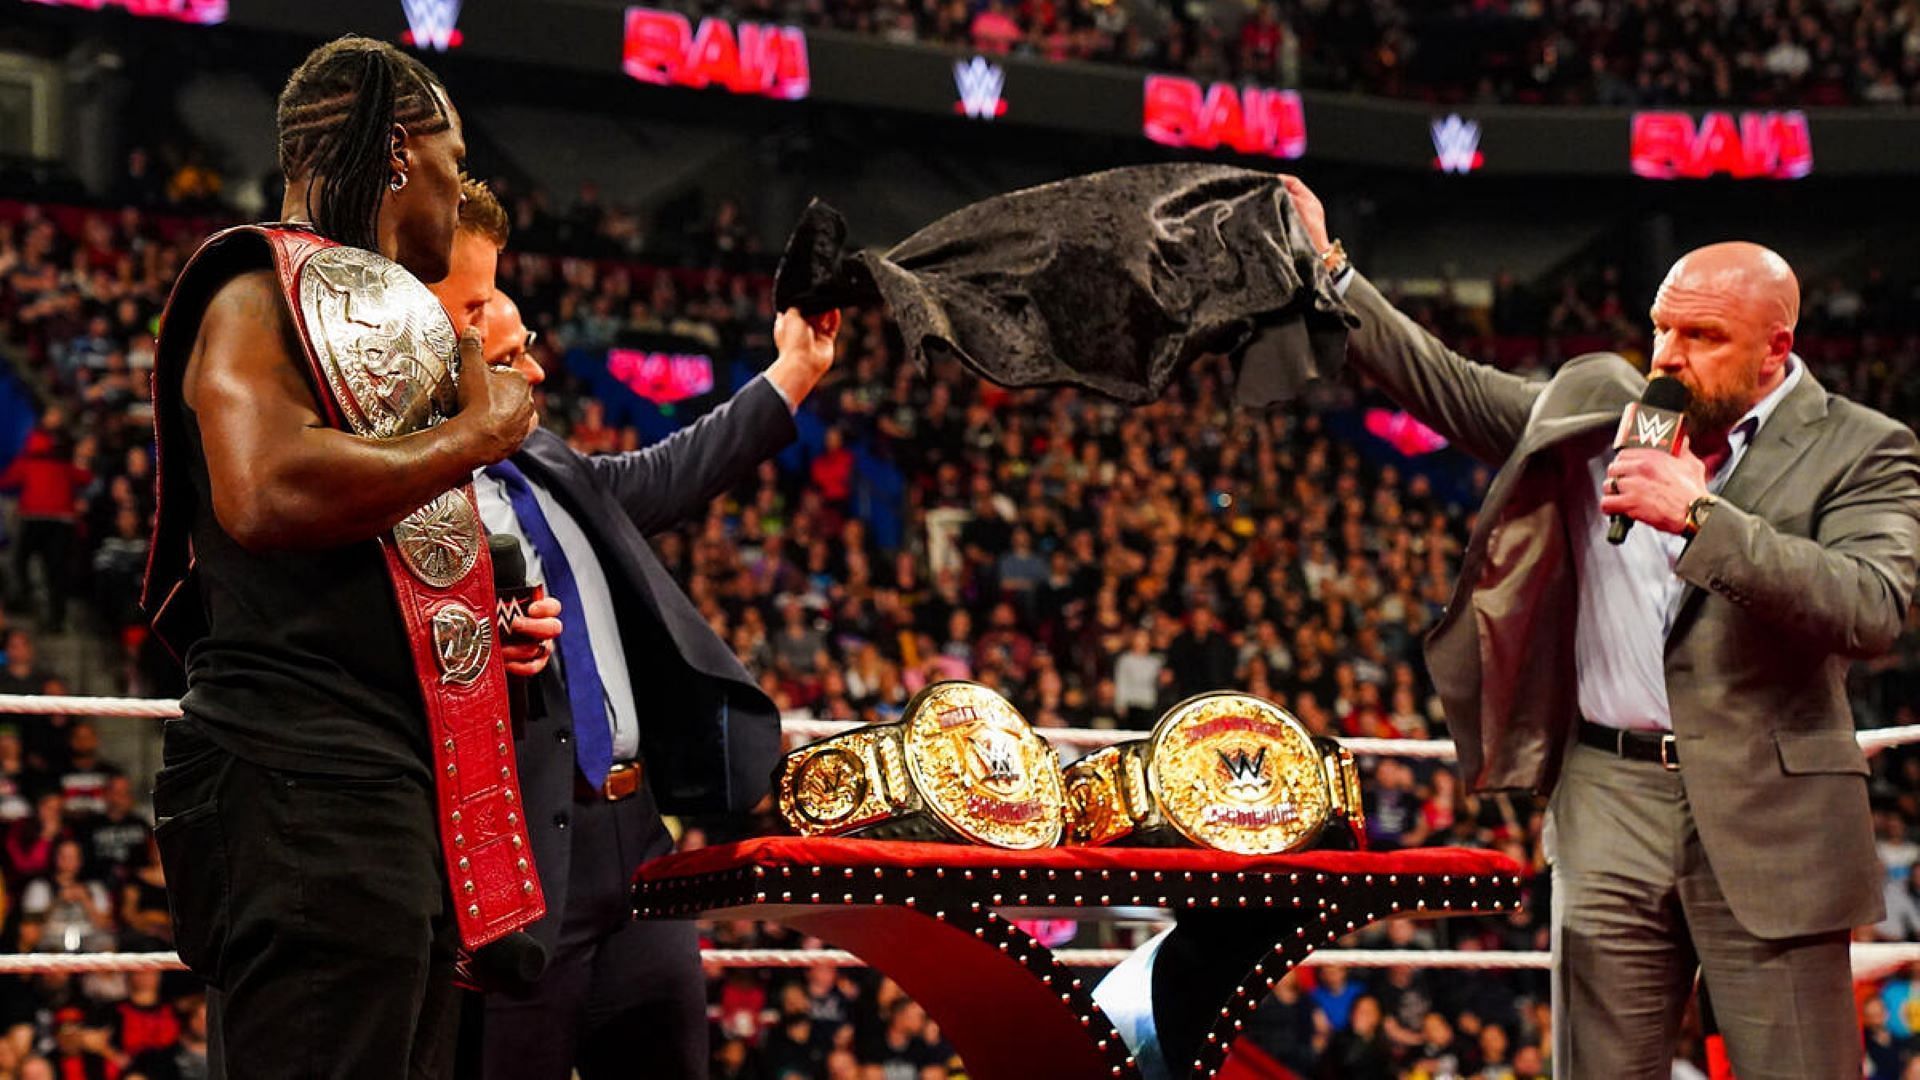 Triple H unveiled the World Tag Team titles on RAW with the help of Adam Pearce.